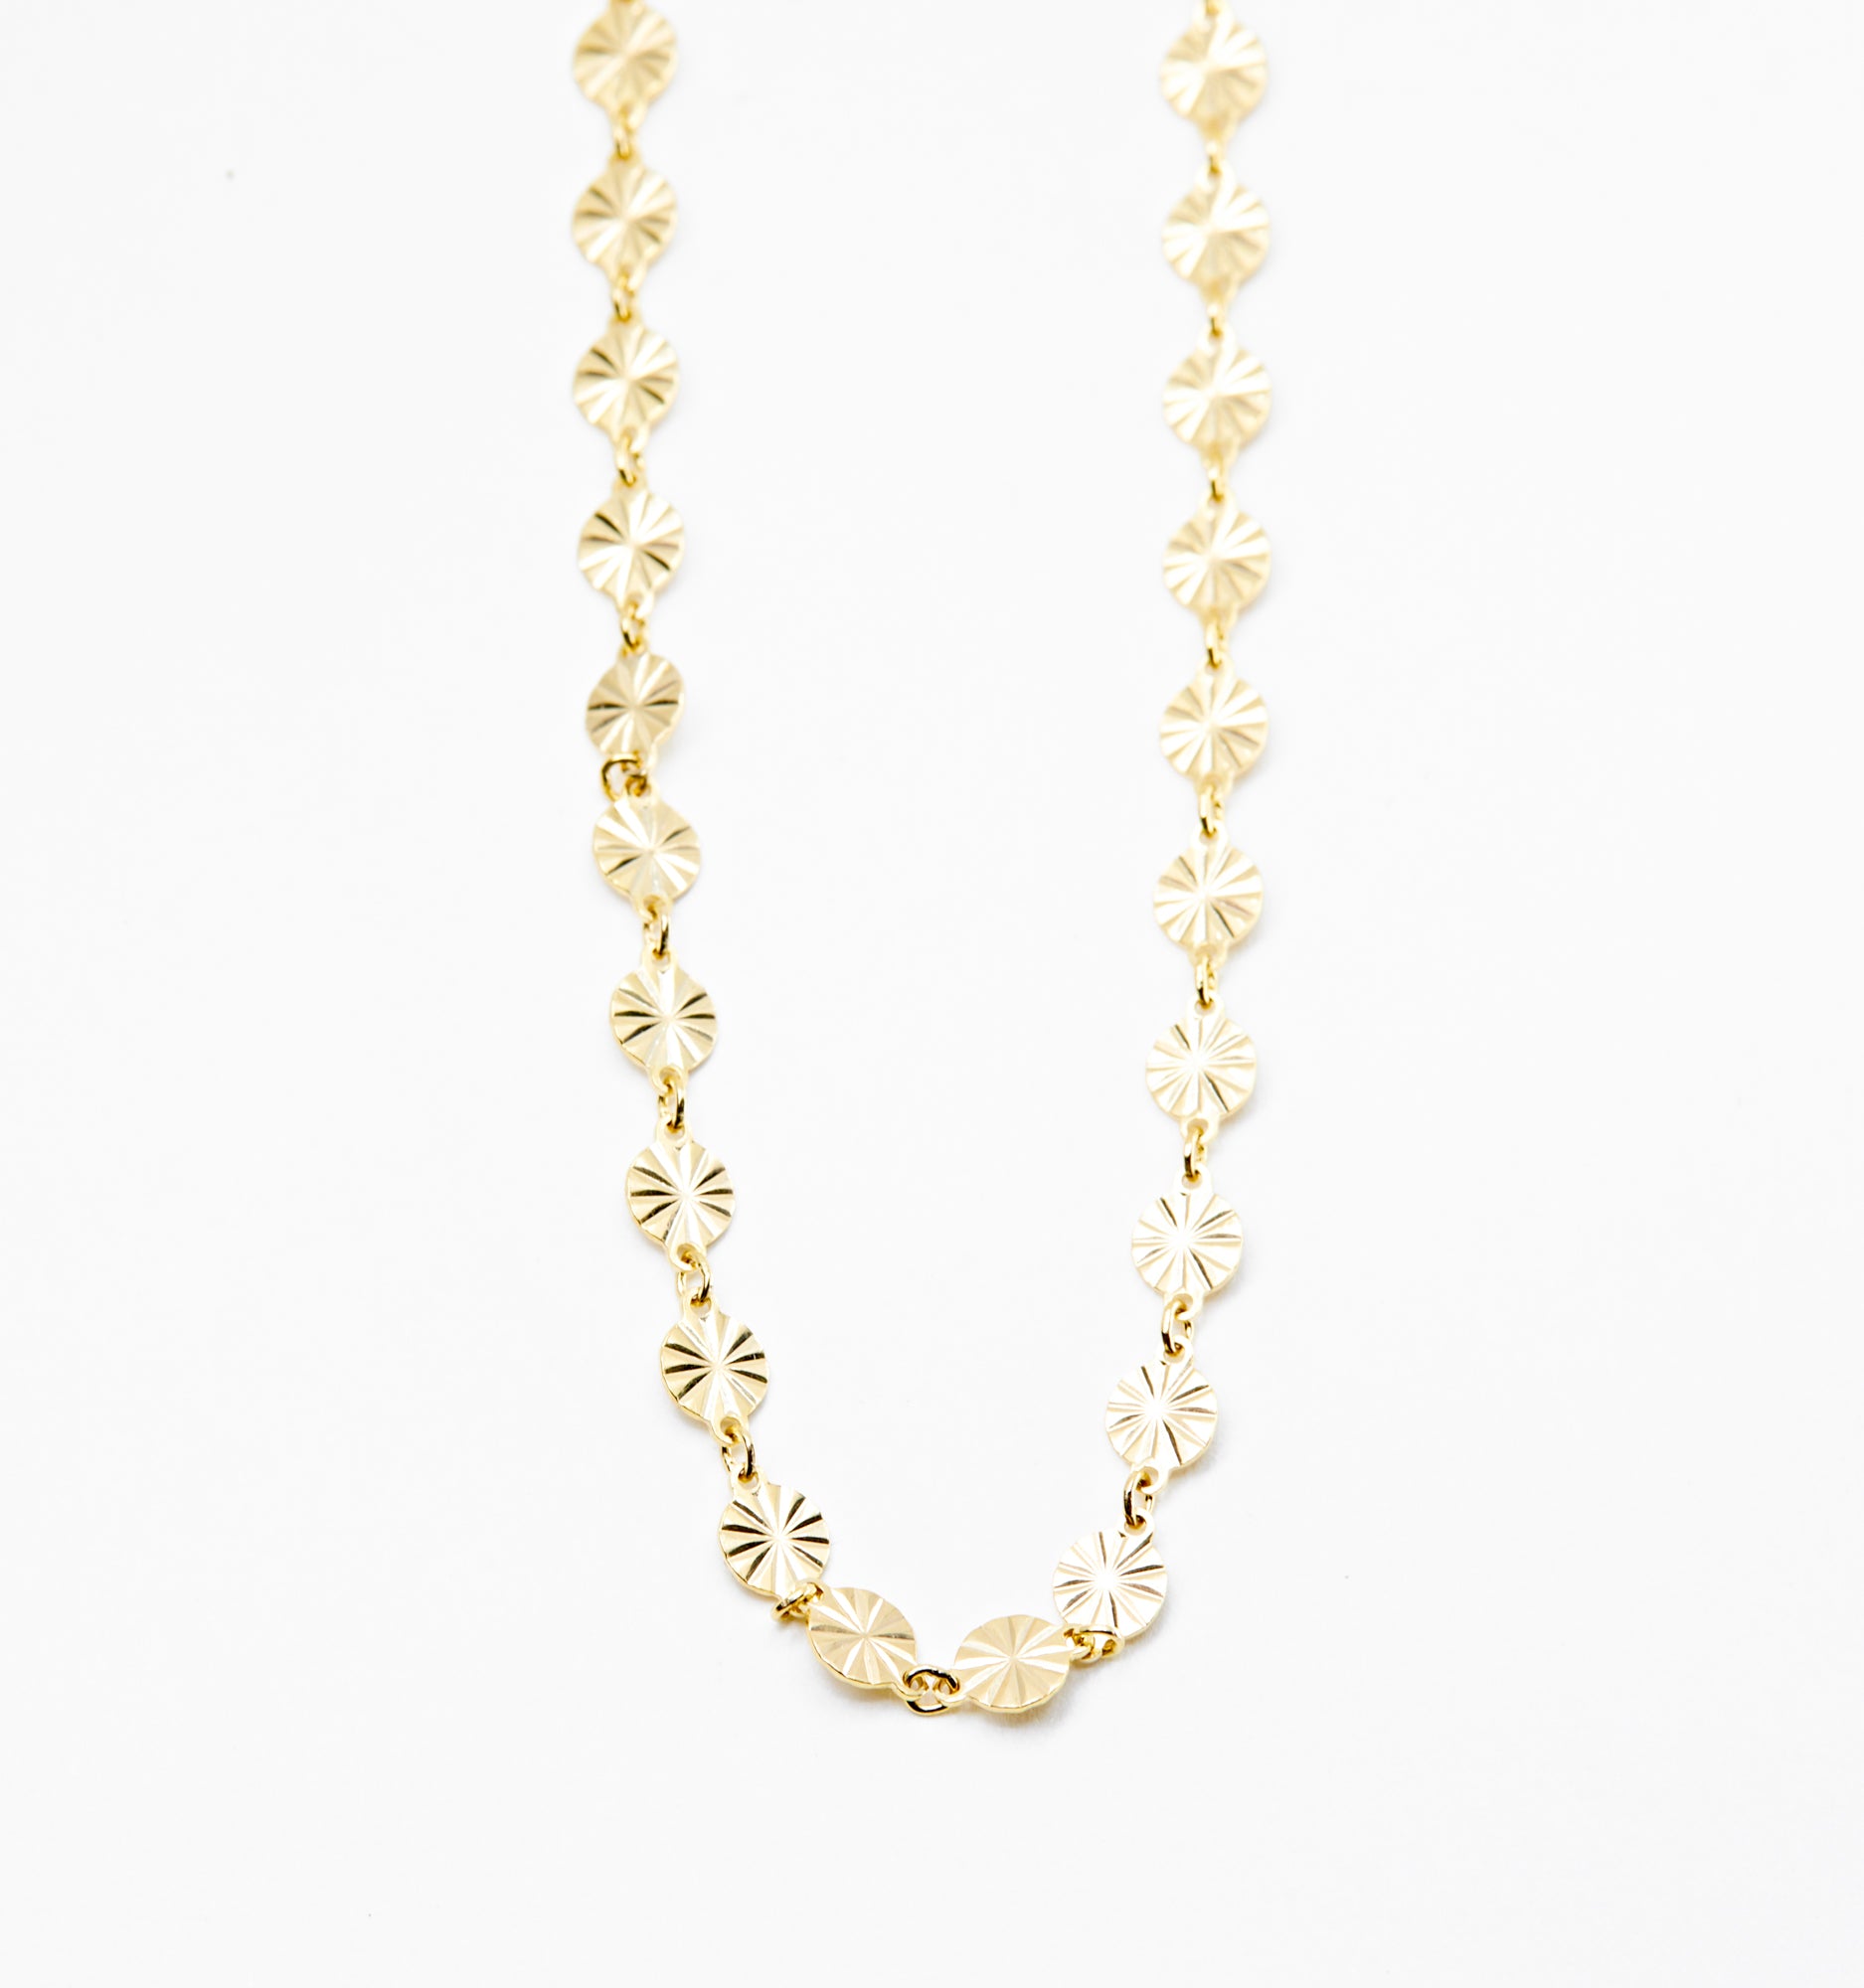 Coin Chain Necklace